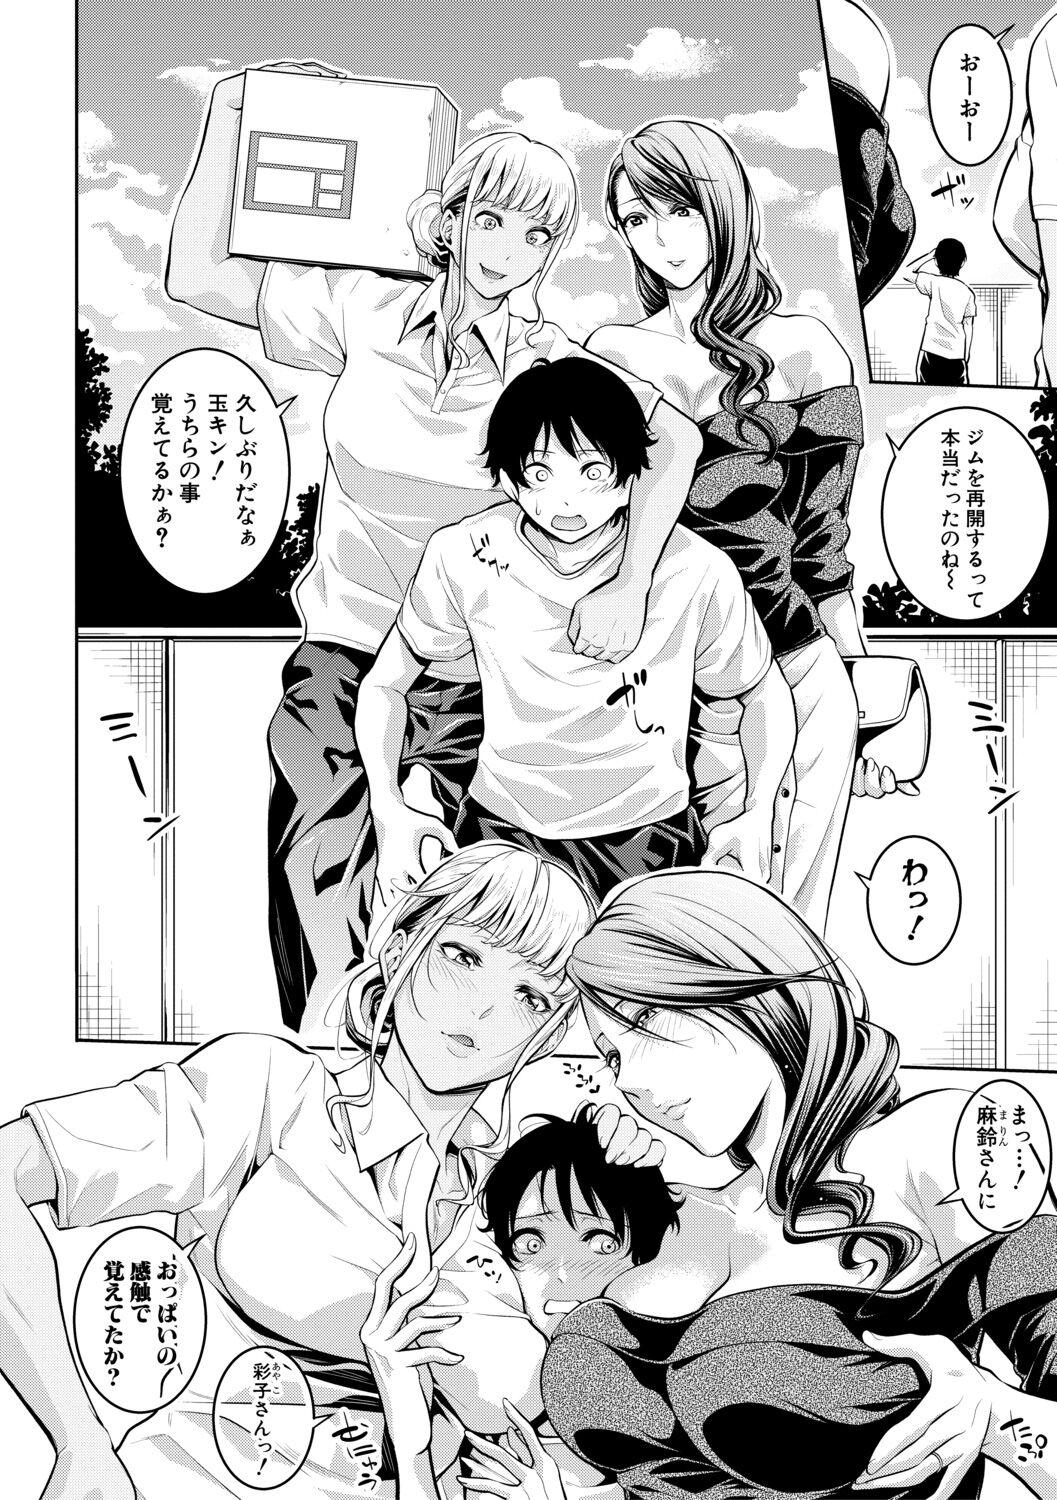 Egypt Onee-san to Ase Mamire Amateurs Gone - Page 7